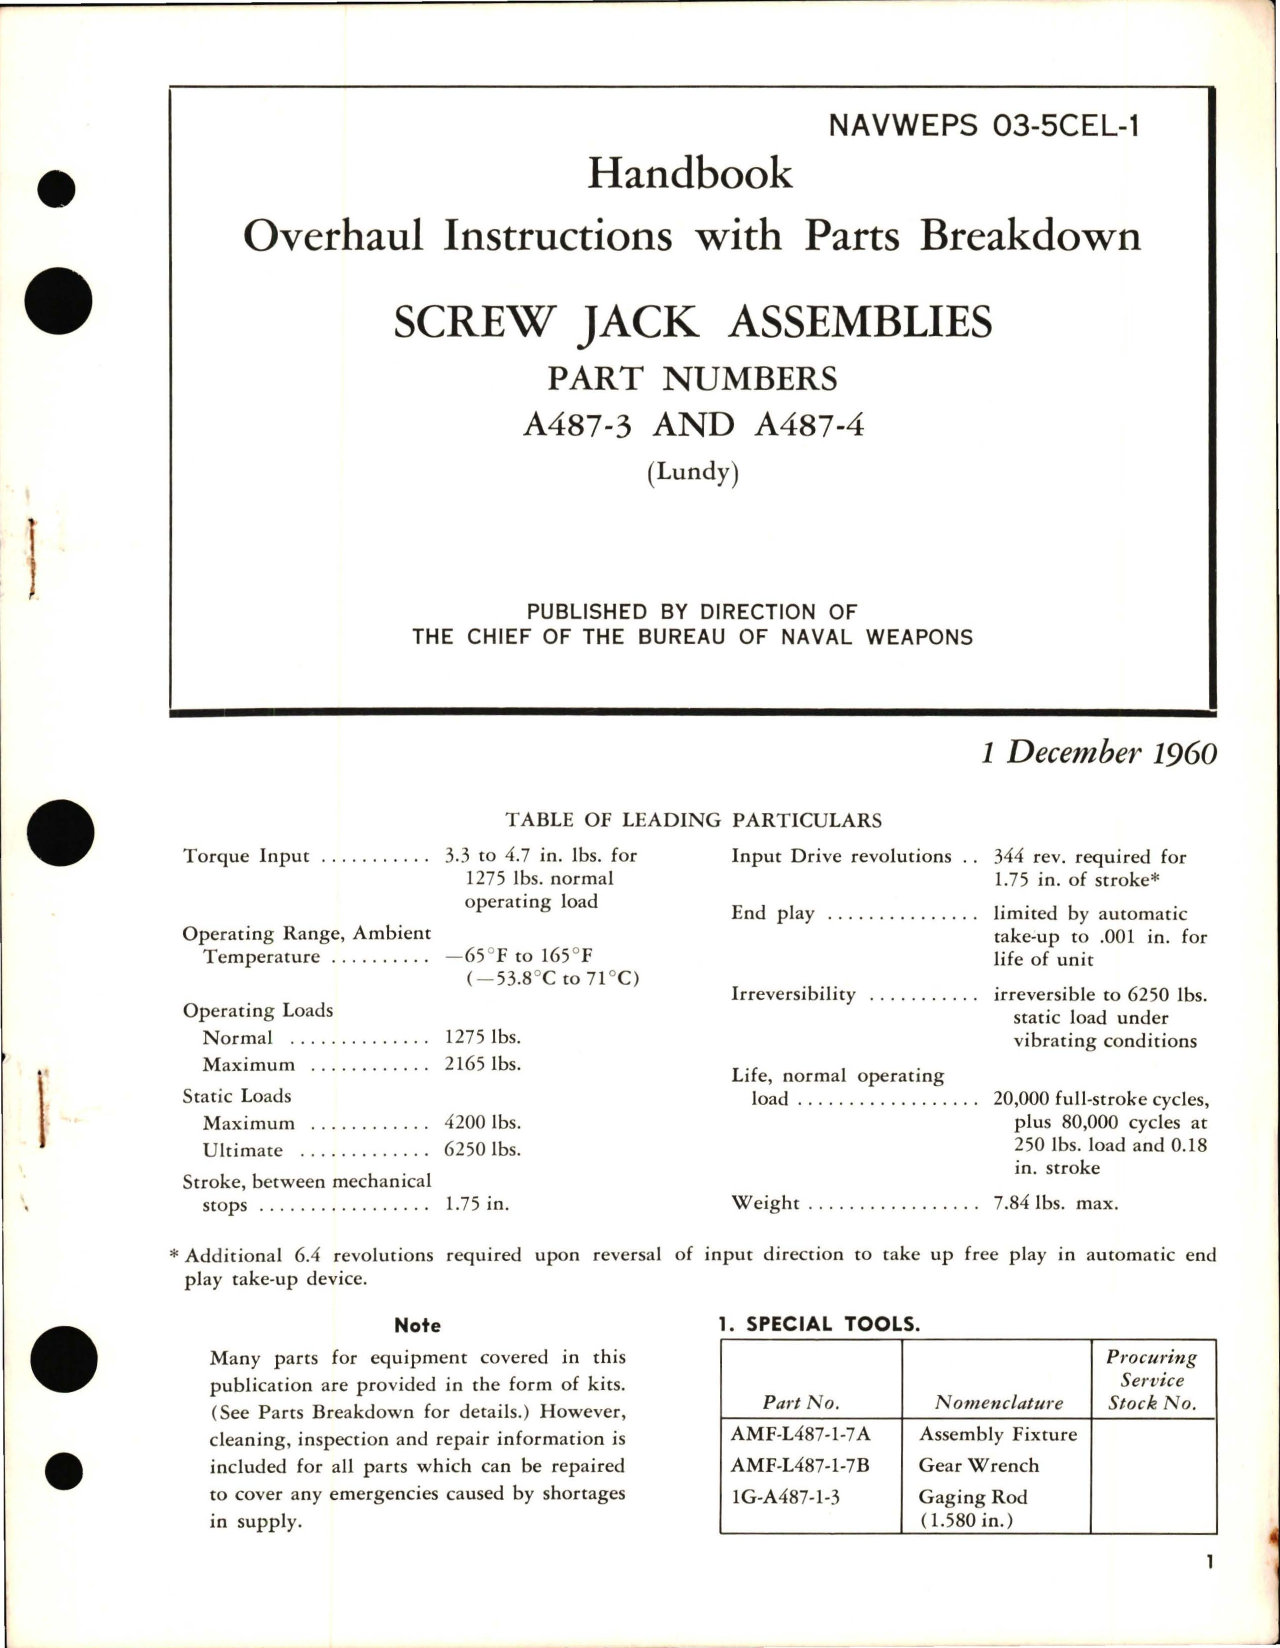 Sample page 1 from AirCorps Library document: Overhaul Instructions with Parts Breakdown for Screw Jack Assemblies - Part A487-3 and A487-4